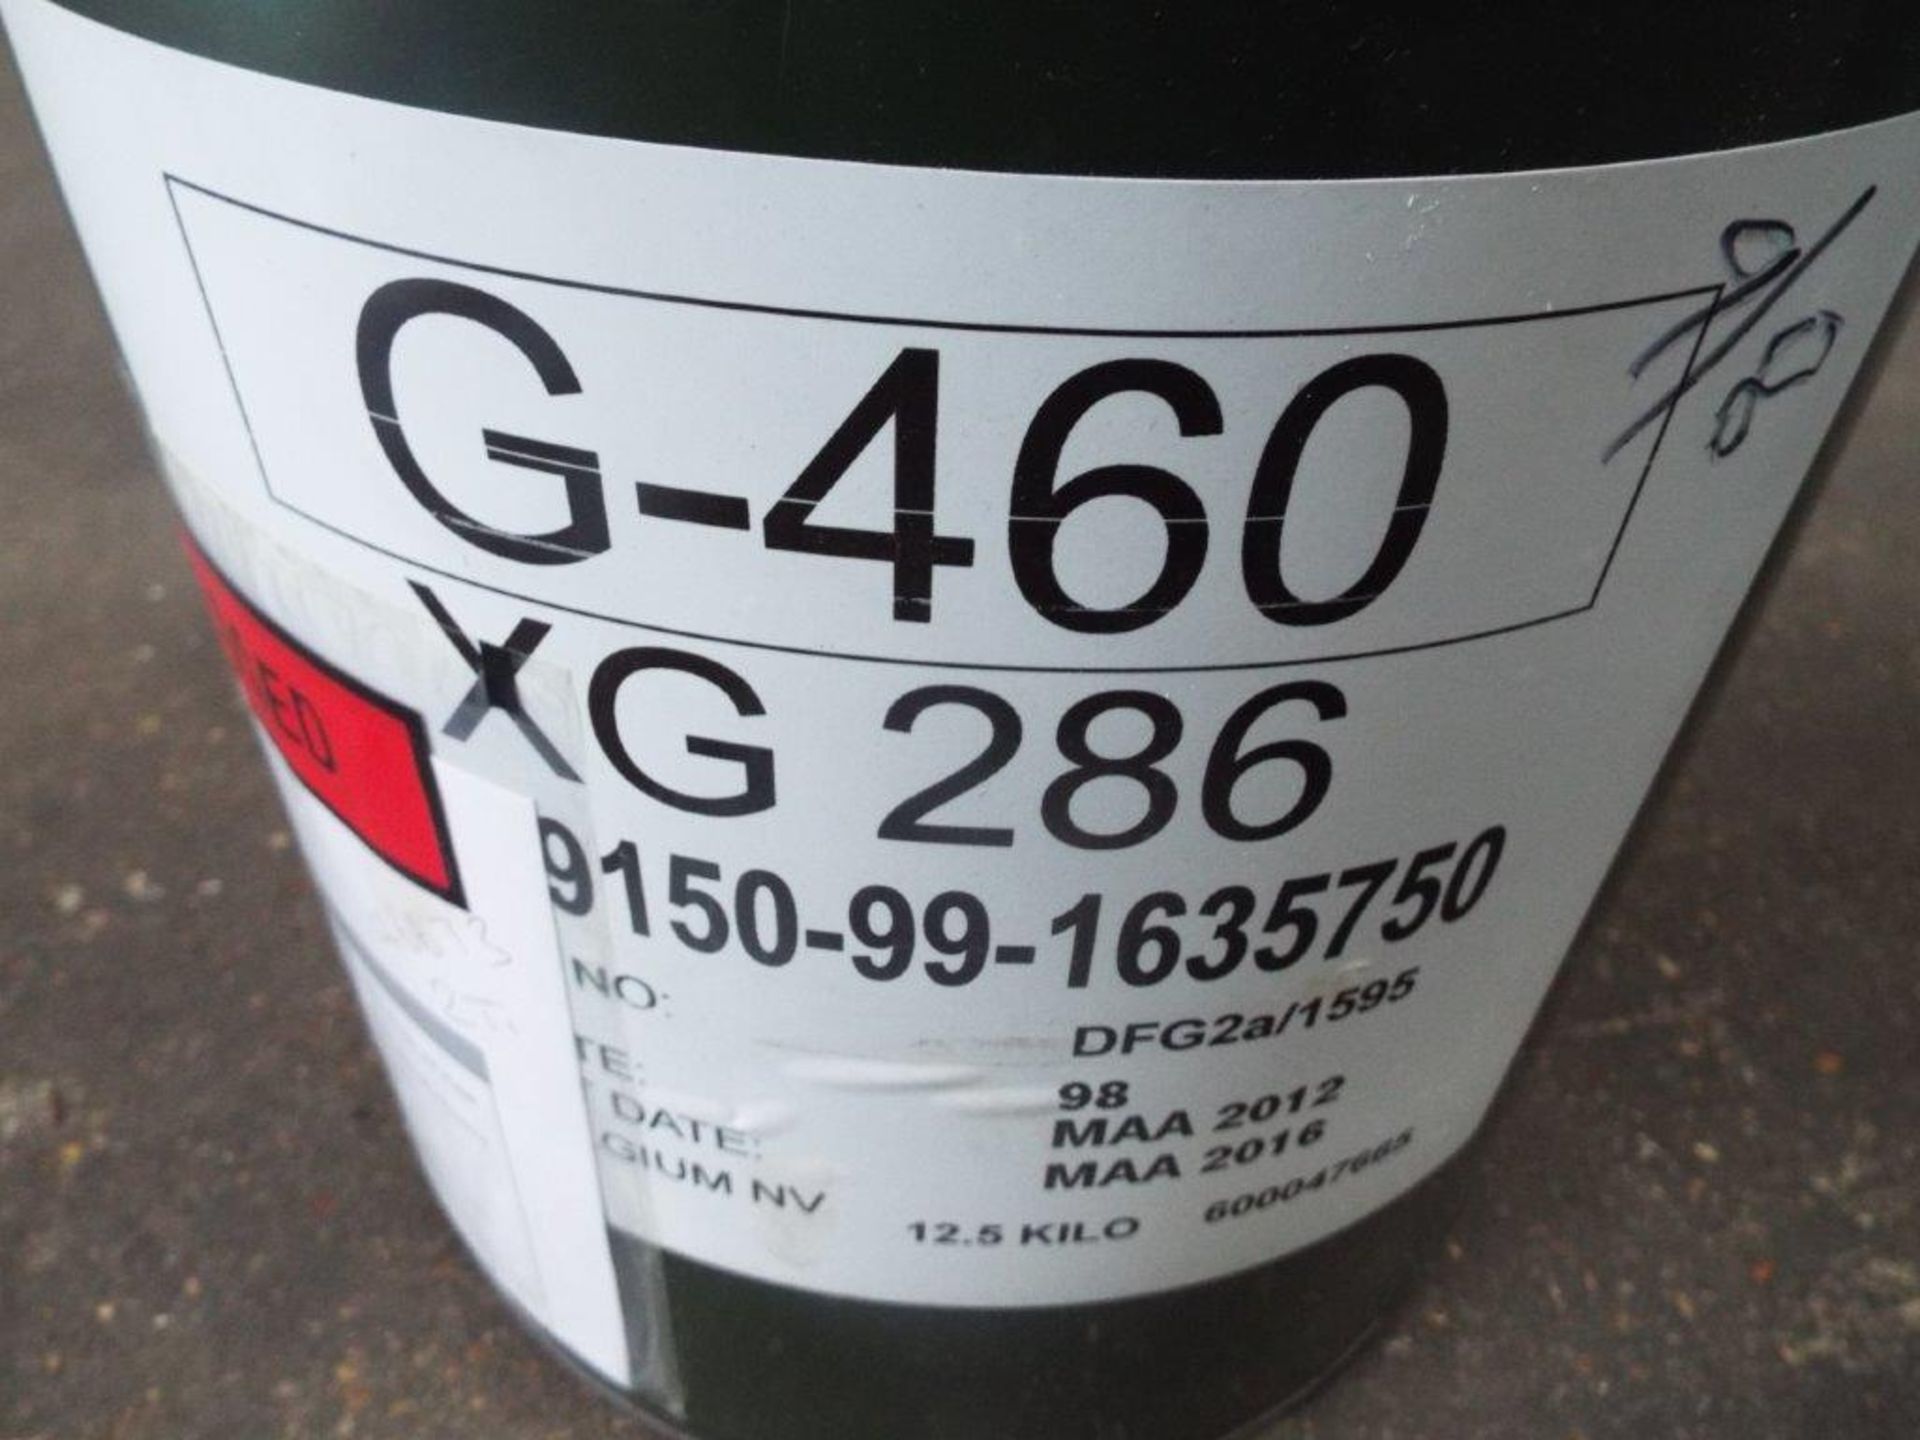 1 x Unissued 12.5Kg Drum of XG-286 Sea Water Resistant Grease - Image 2 of 3